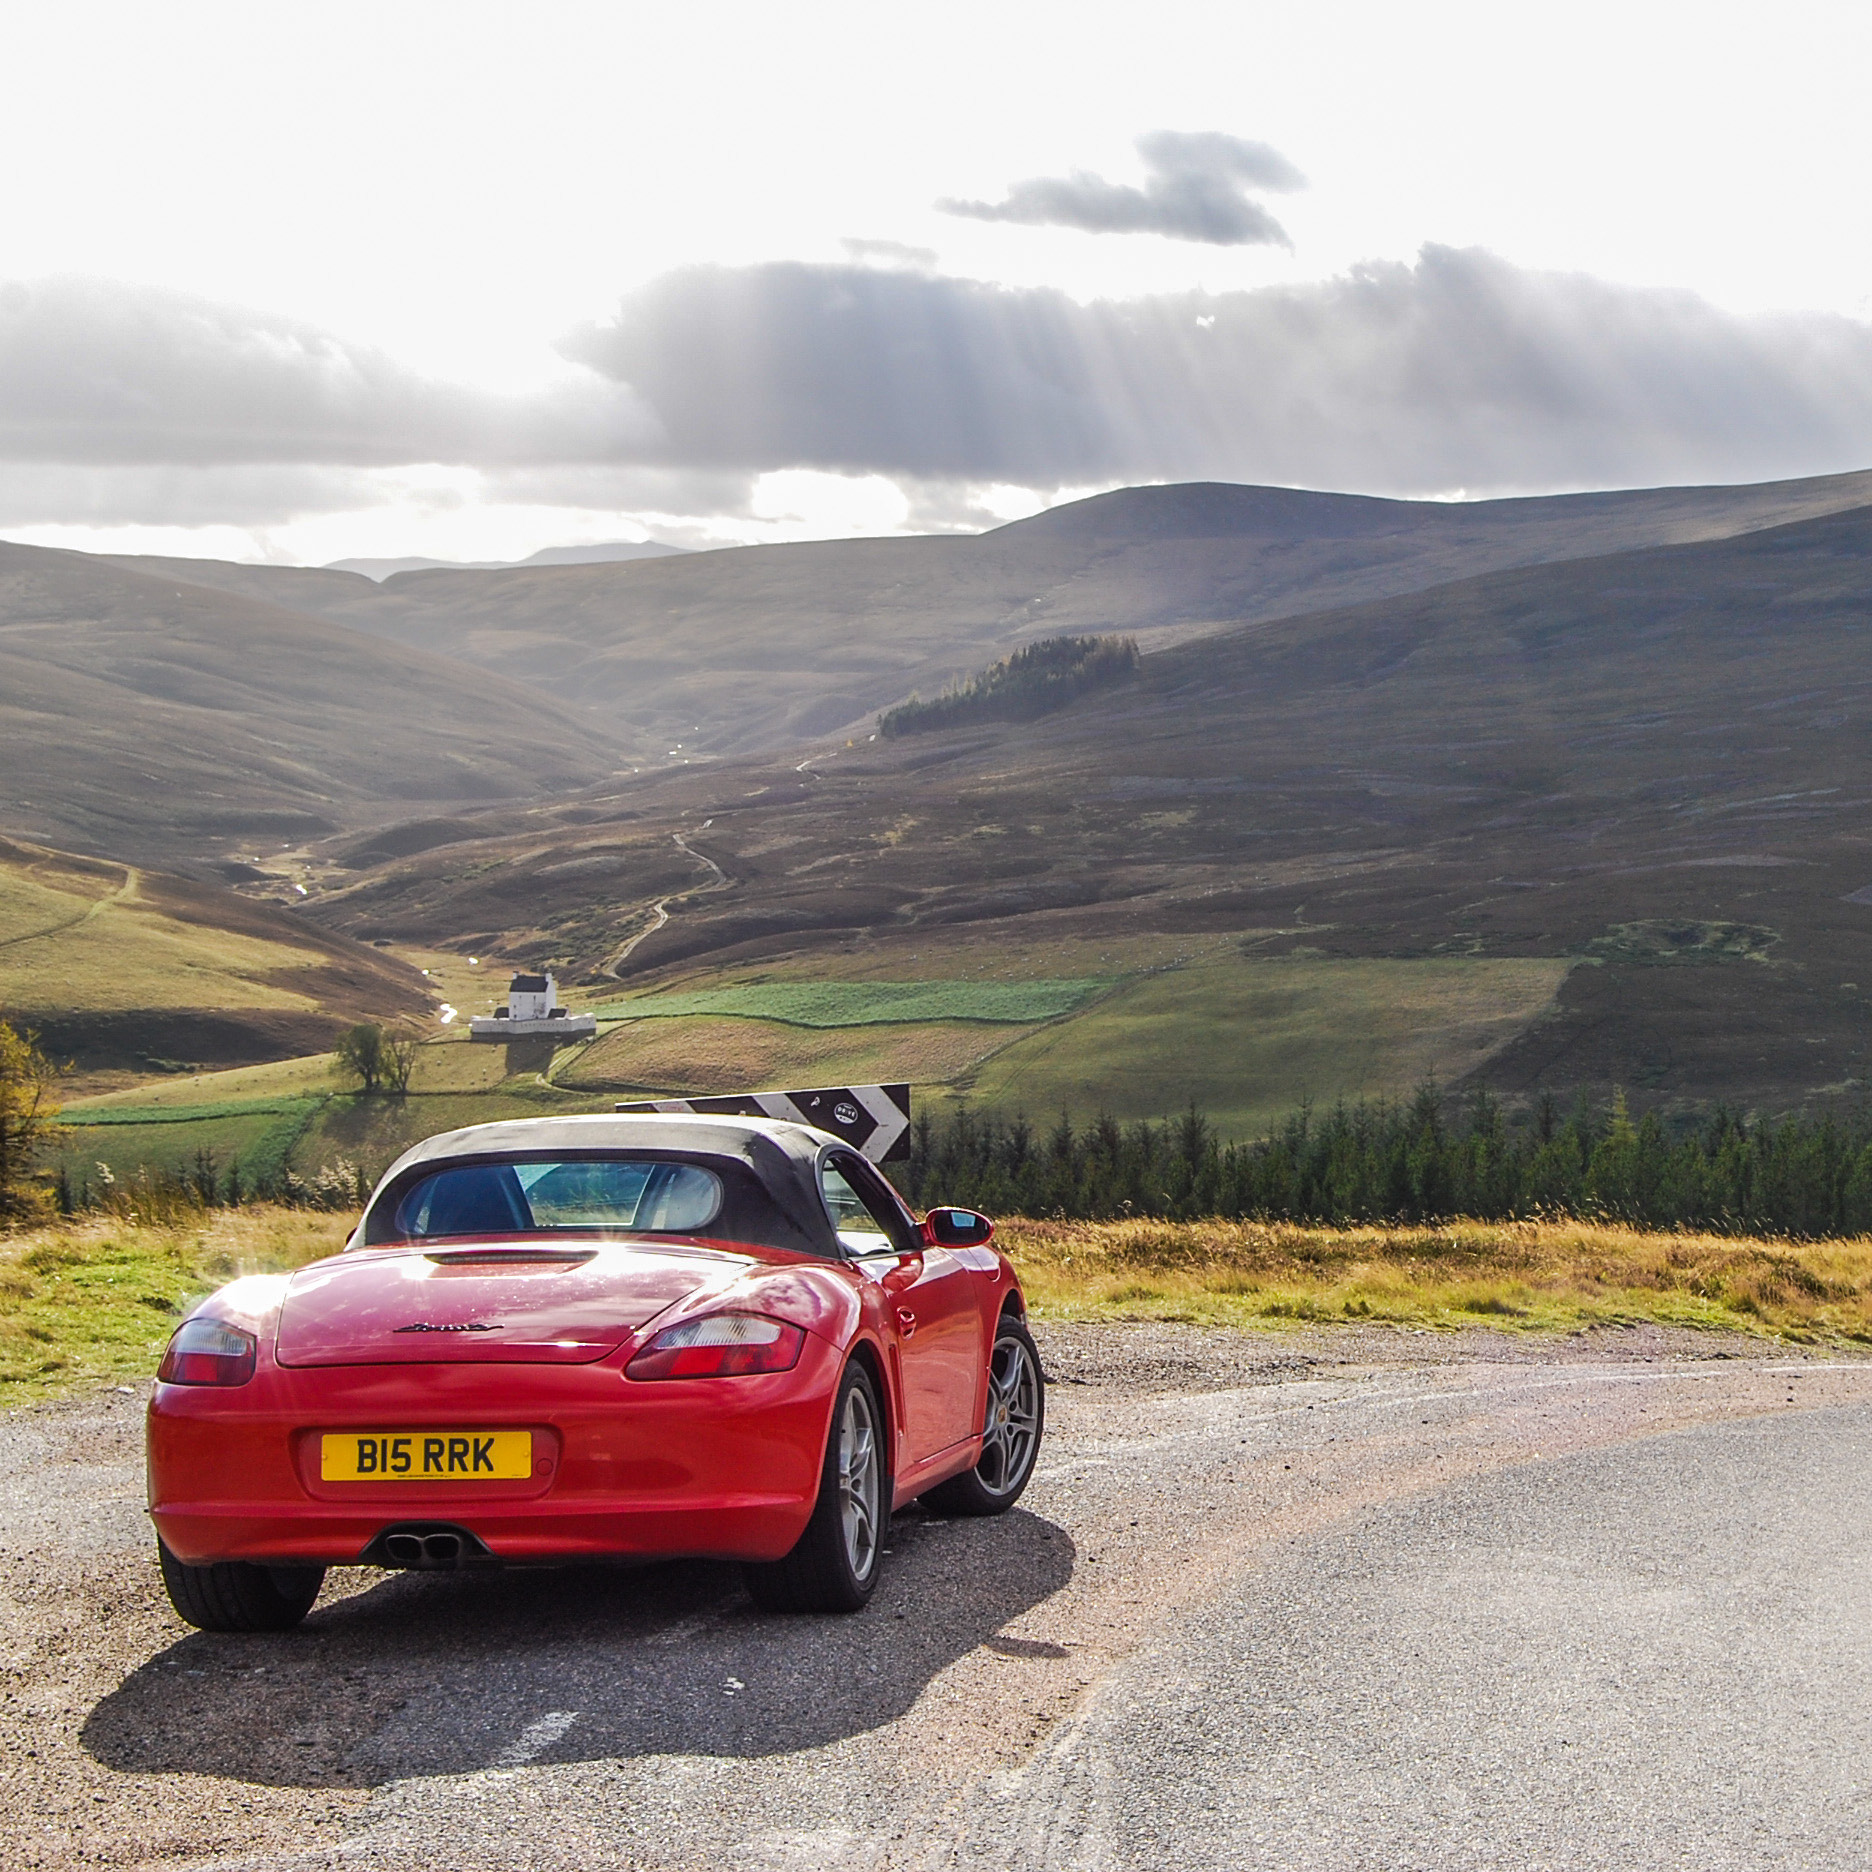 2005 Porsche Boxster 987 2.7 - Page 1 - Readers' Cars - PistonHeads UK